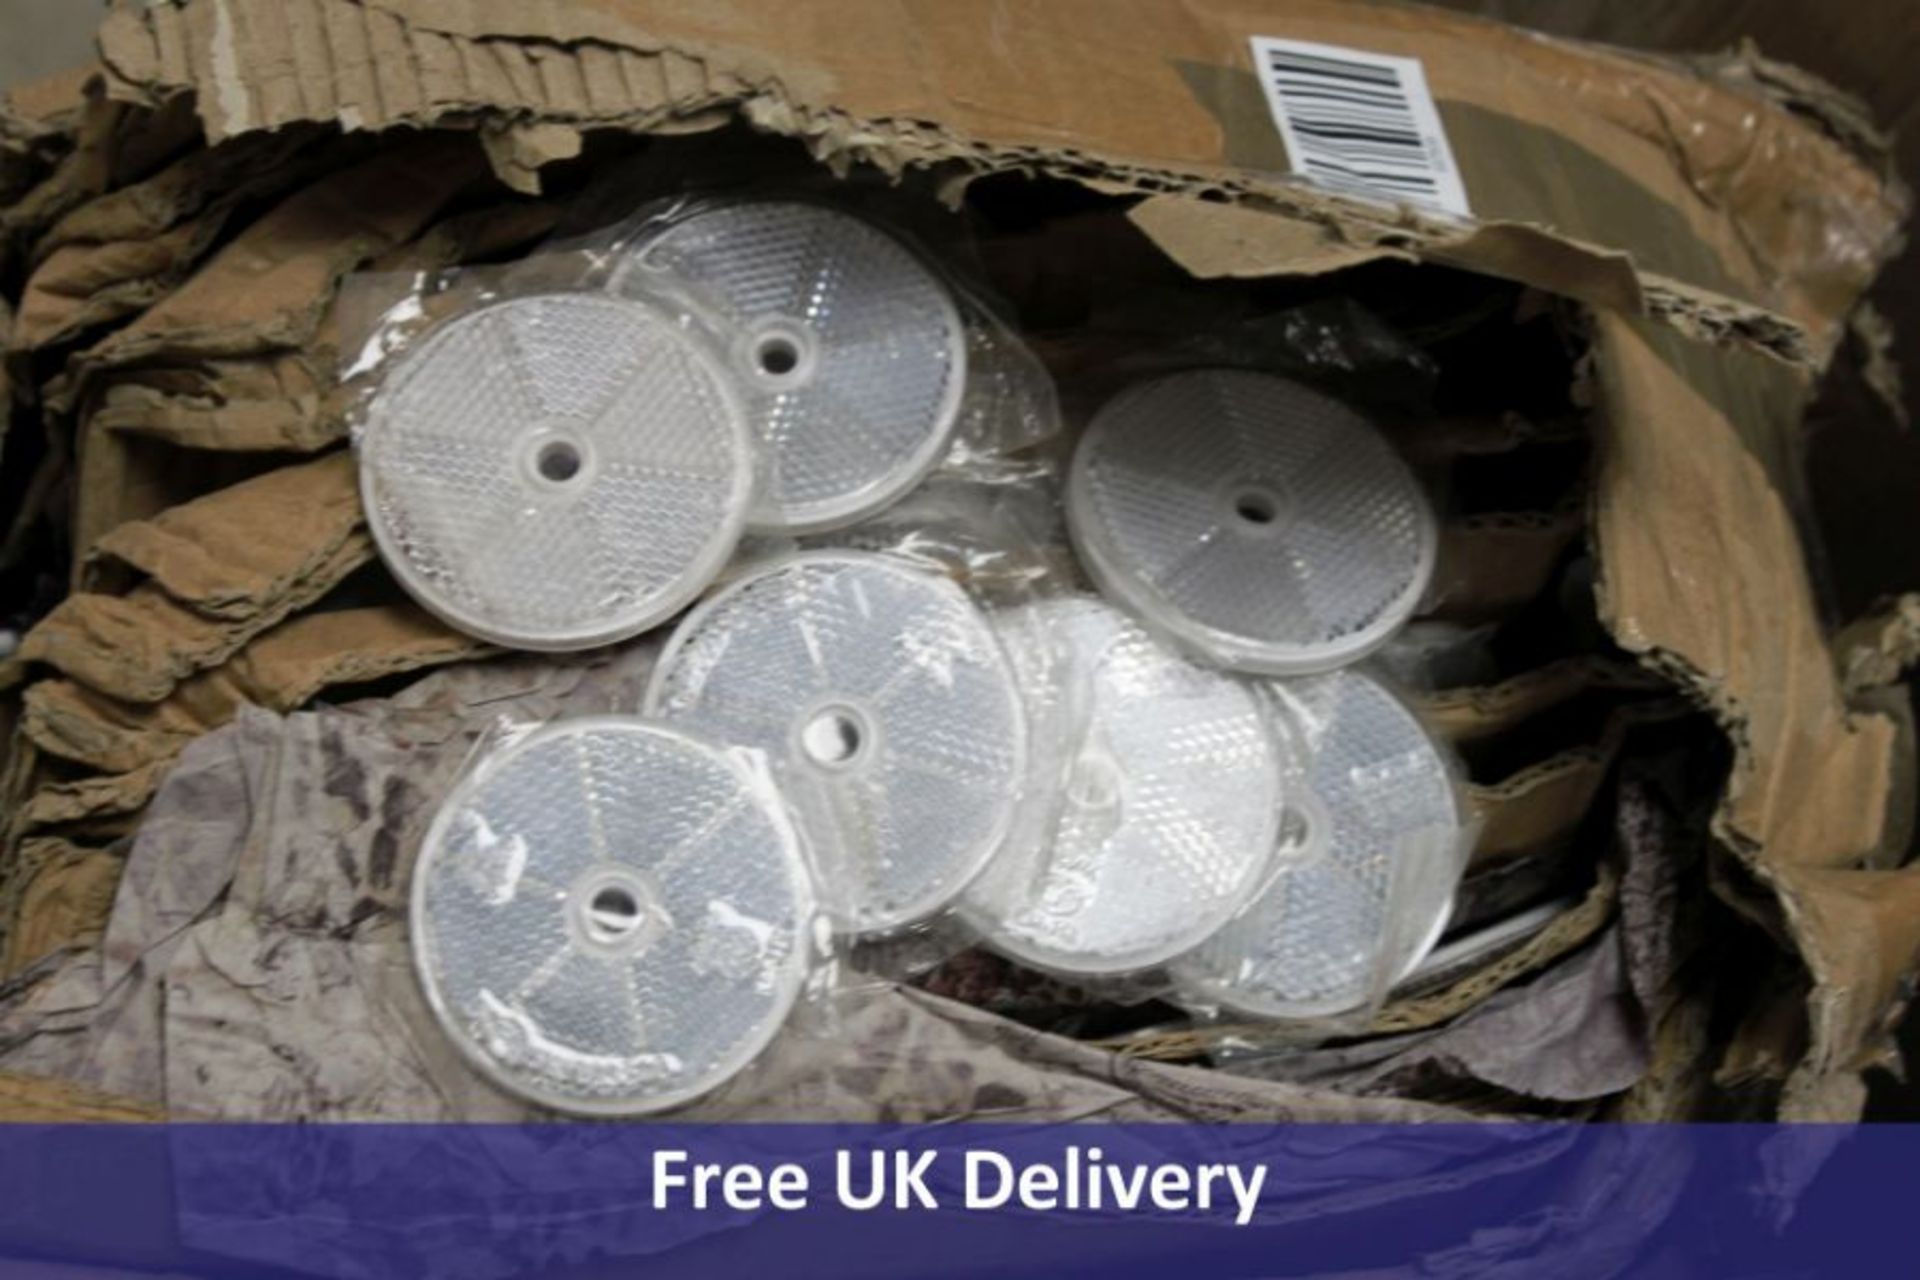 Five Hundred Pairs of White Trailer Horse Box Reflectors